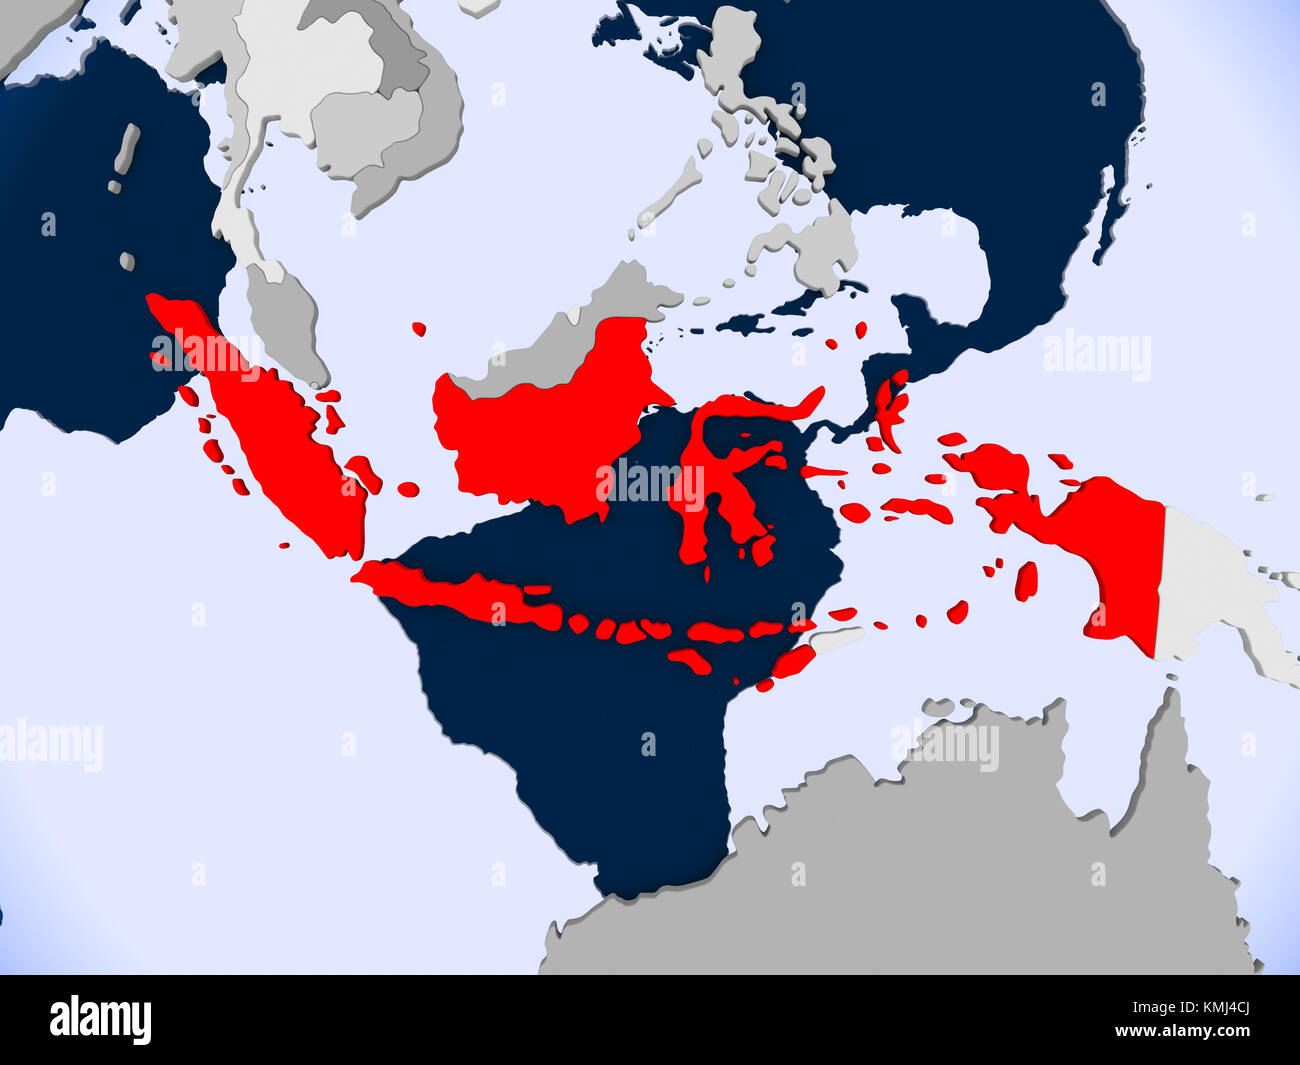 Indonesia in red on political map with transparent oceans. 3D illustration. Stock Photo